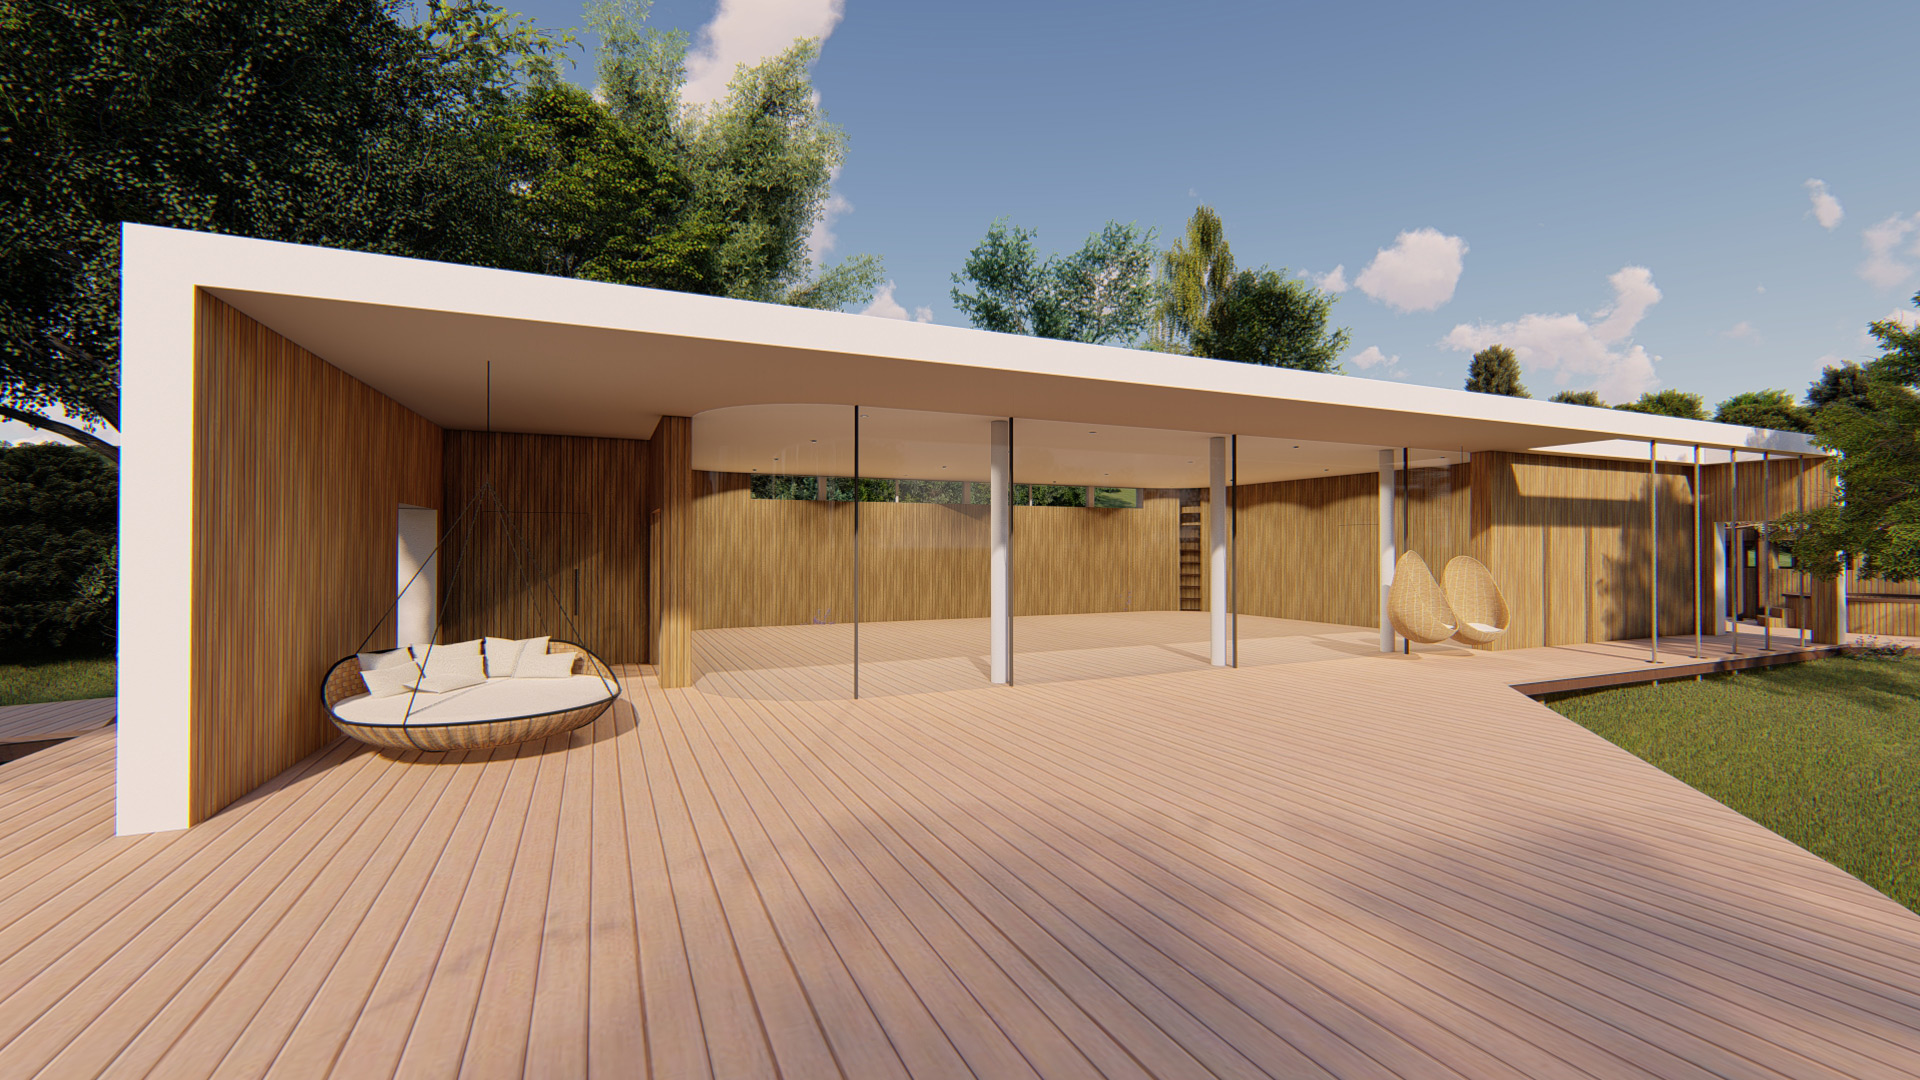 visual for new yoga studio from front of building showing large windows at front and wooded cladding surround